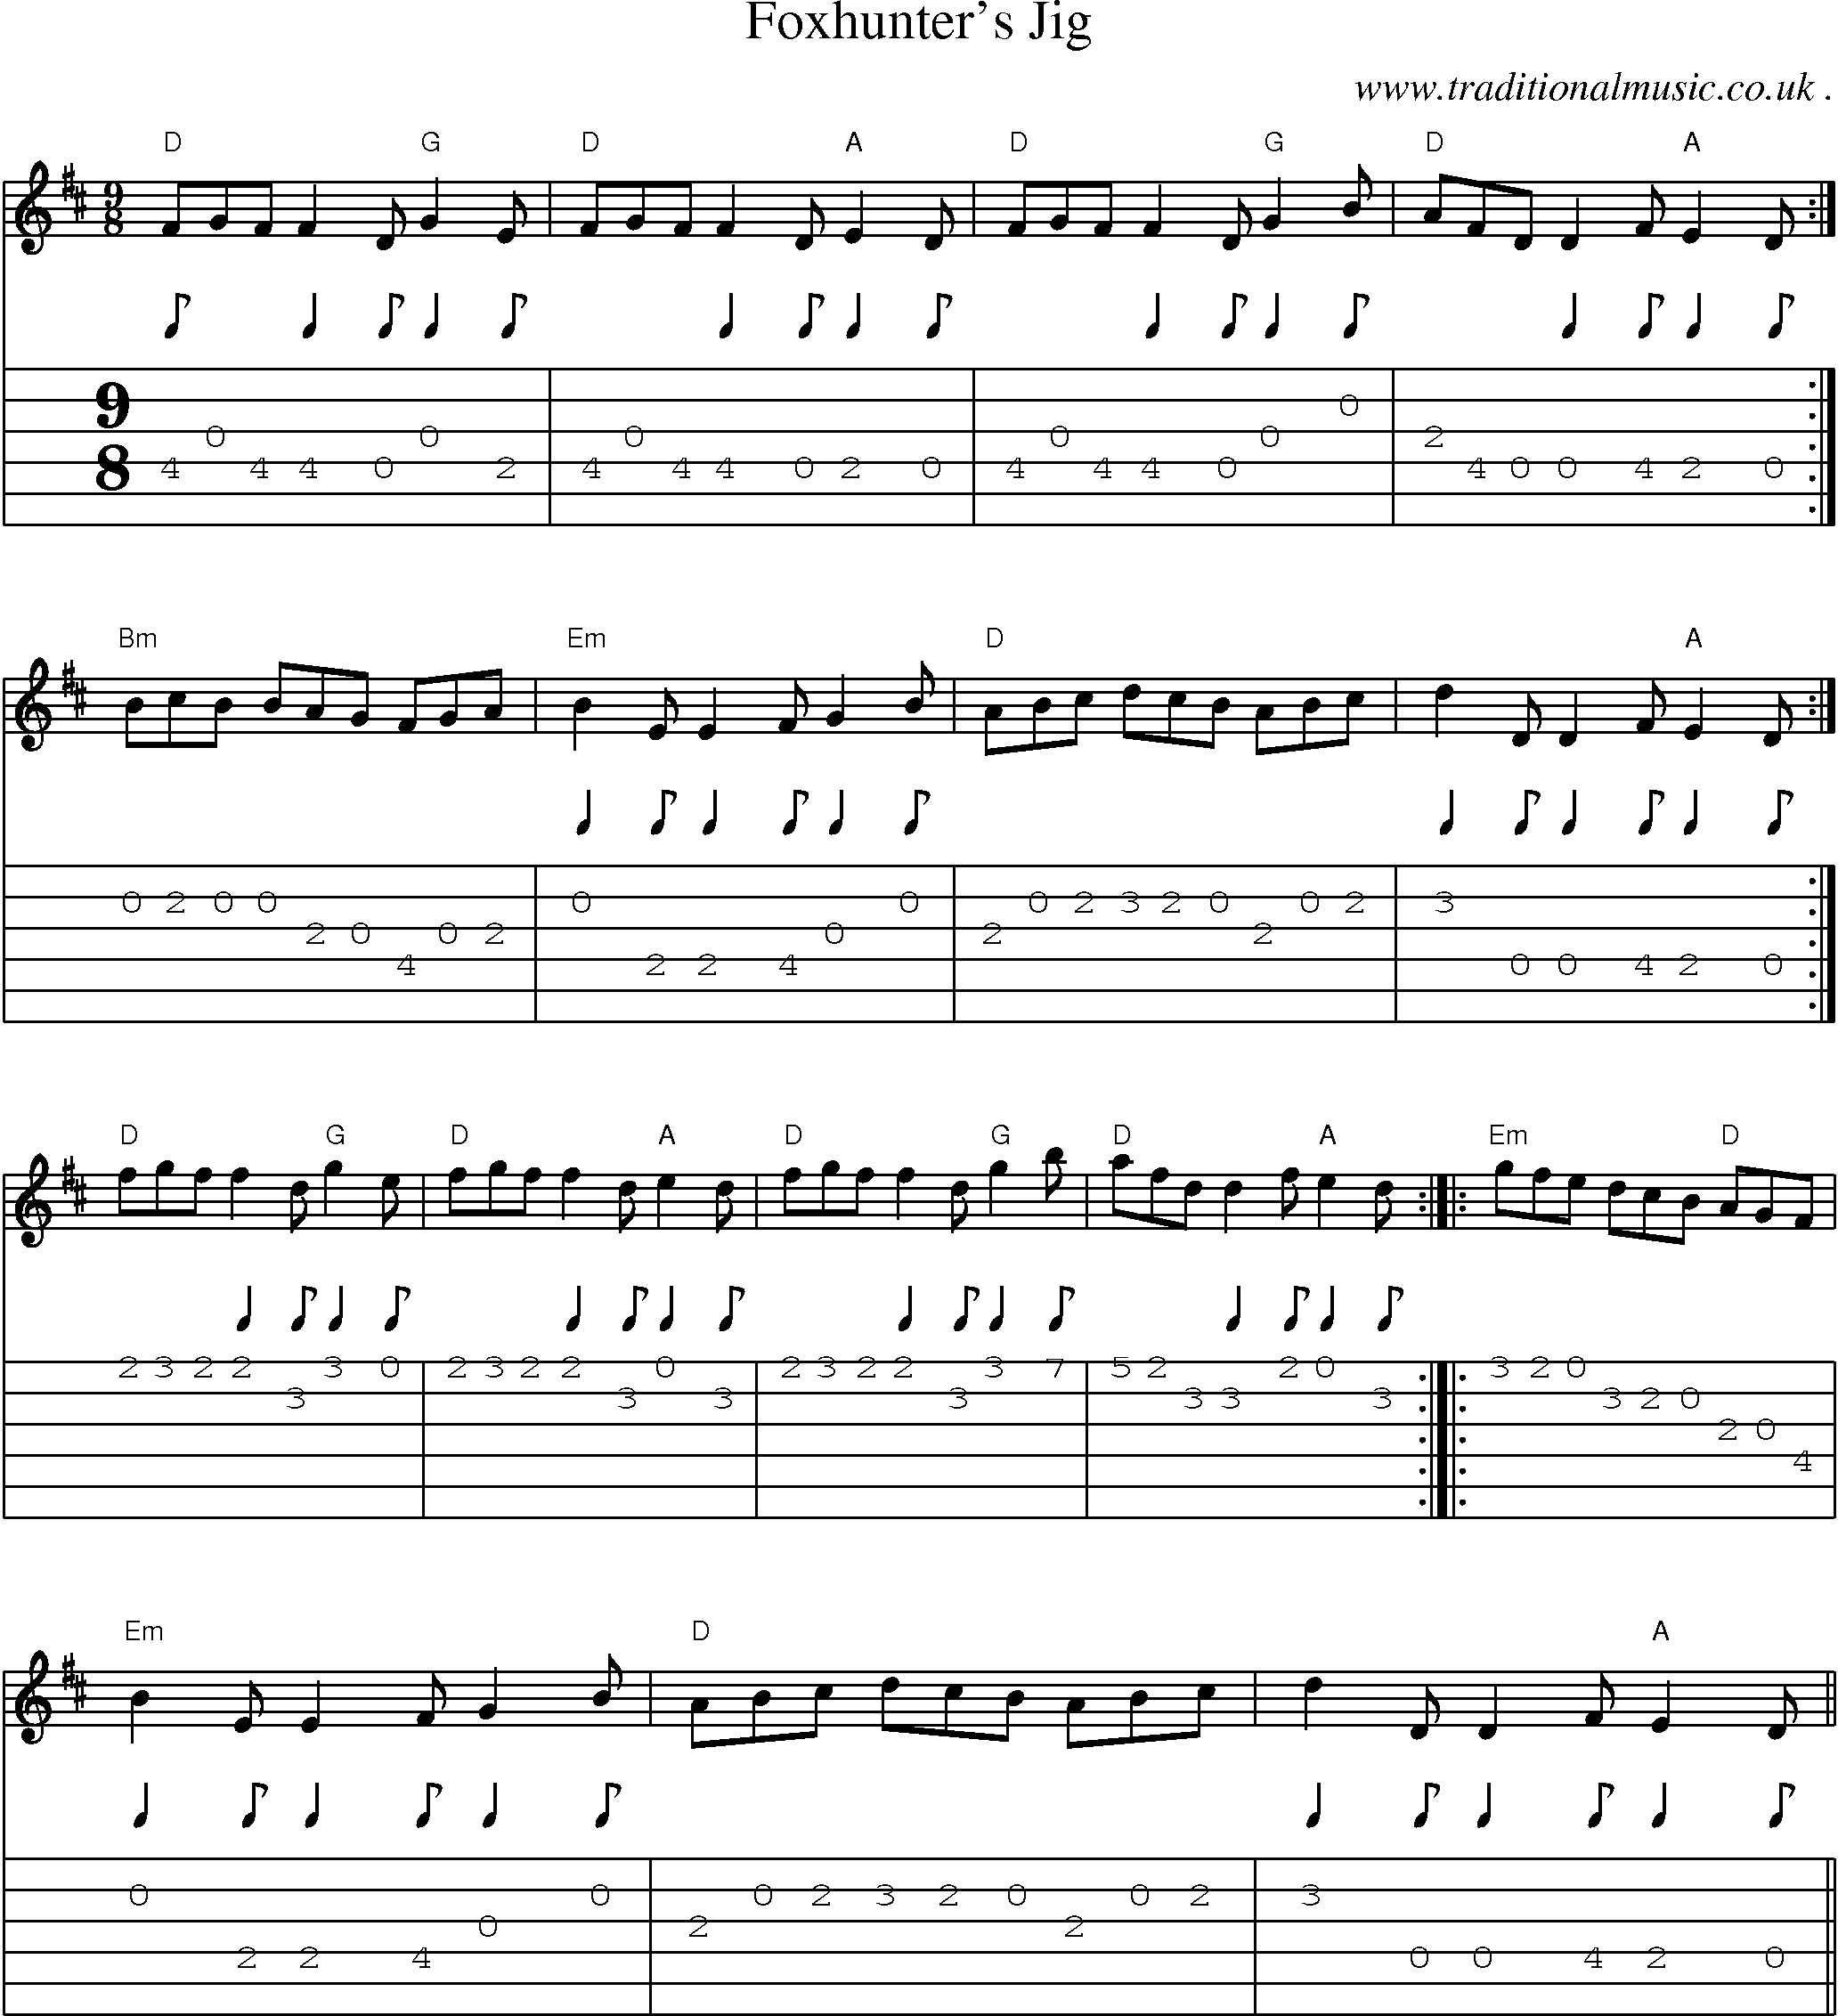 Music Score and Guitar Tabs for Foxhunters Jig